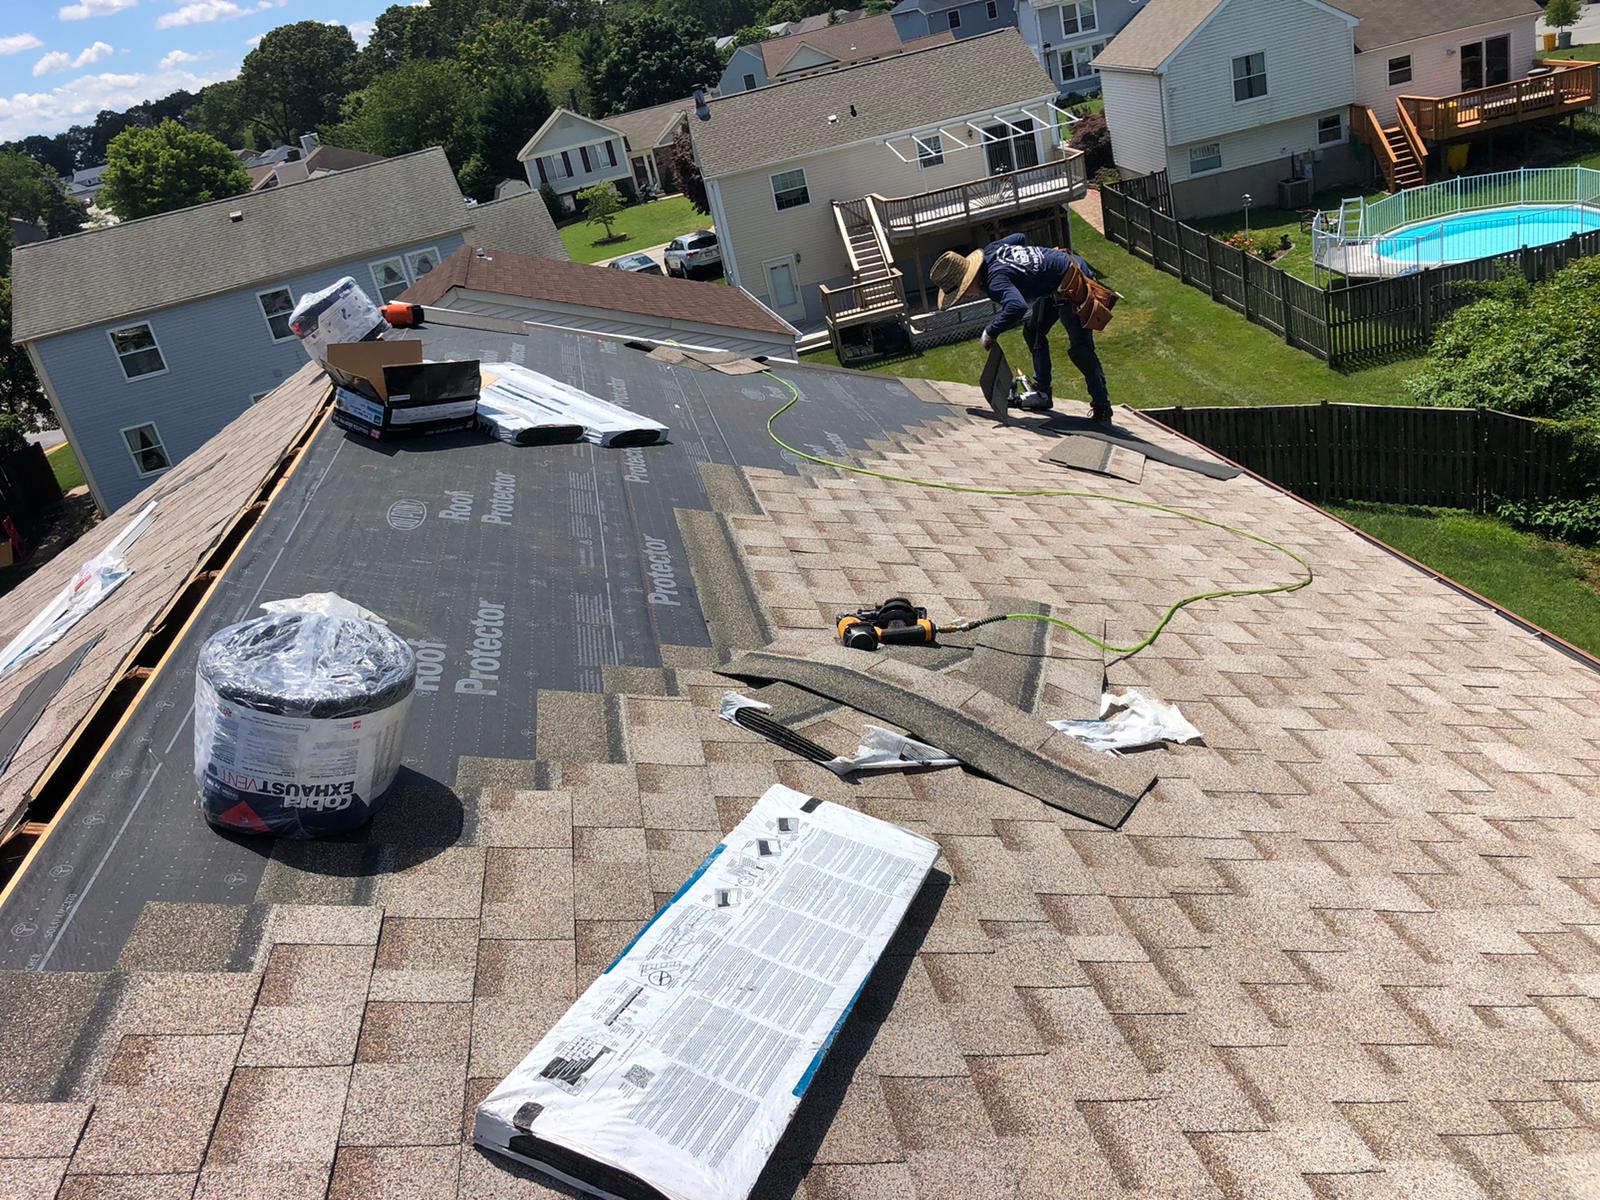 Roofing Project near Pasadena Maryland MD